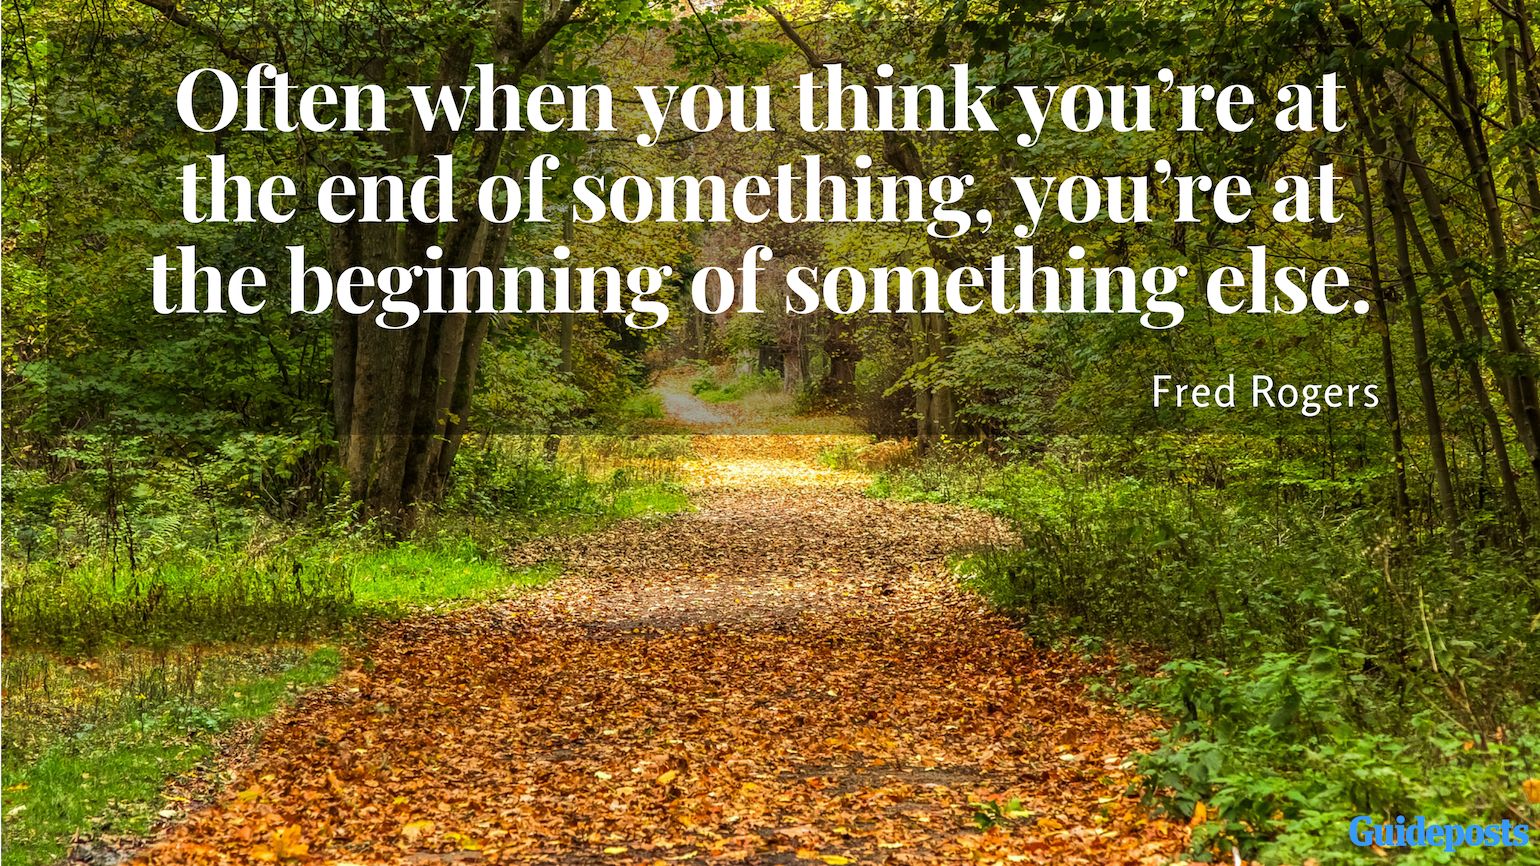 Inspirational Quotes for Retirement: “Often when you think you’re at the end of something, you’re at the beginning of something else.” – Fred Rogers Better Living Life Advice